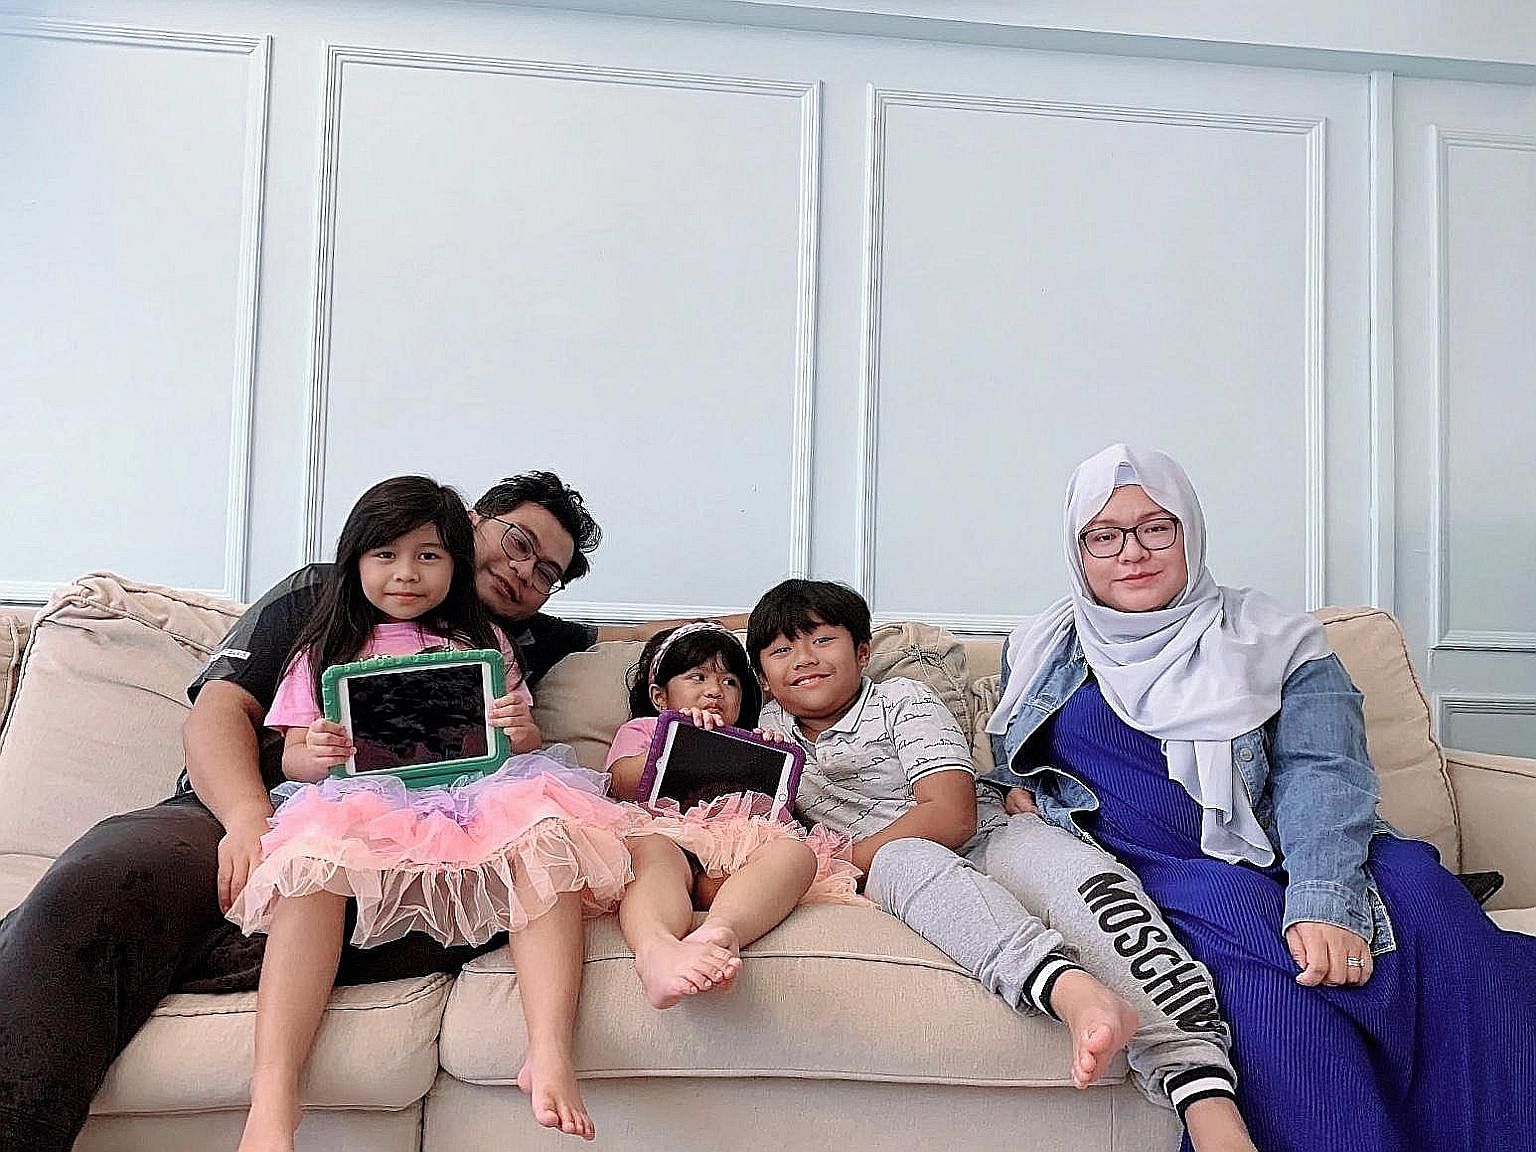 Ms Nur Hafizah Sulaiman’s husband, Mr Mohammed Fariheen Mohamed Faroukh, whose work schedule is more flexible than hers, supervised their children’s home-based learning recently, while she attended to work calls. 